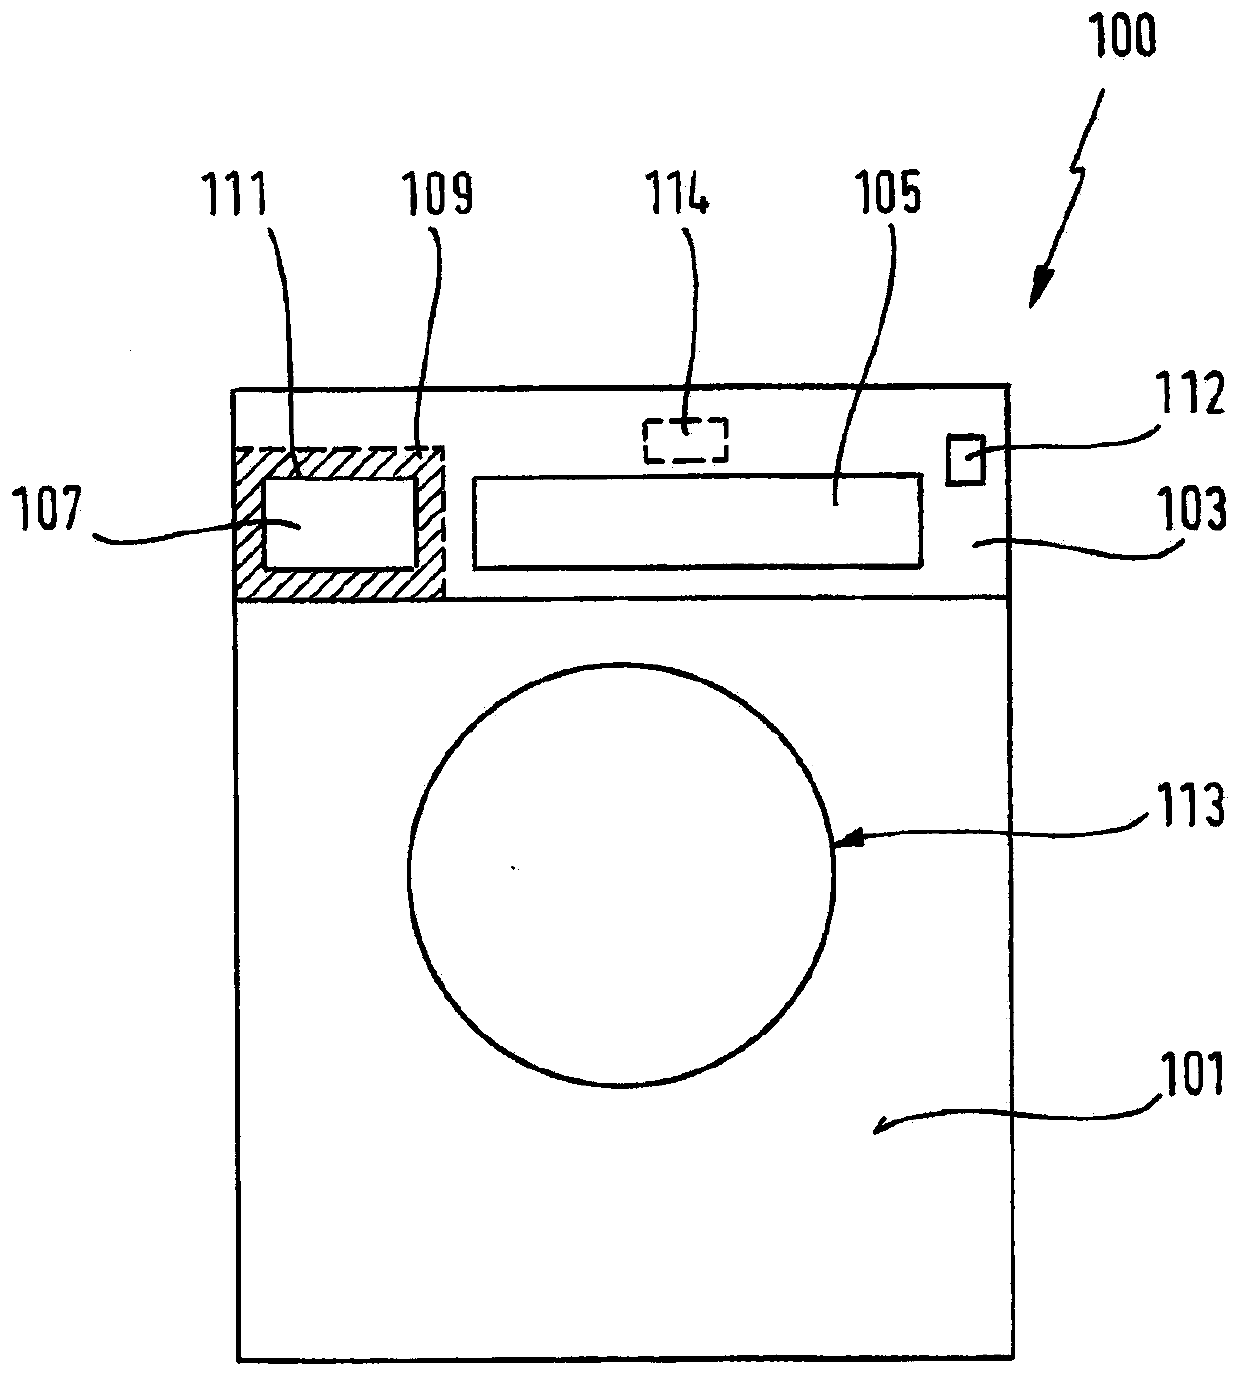 Laundry care device with a light emitting module